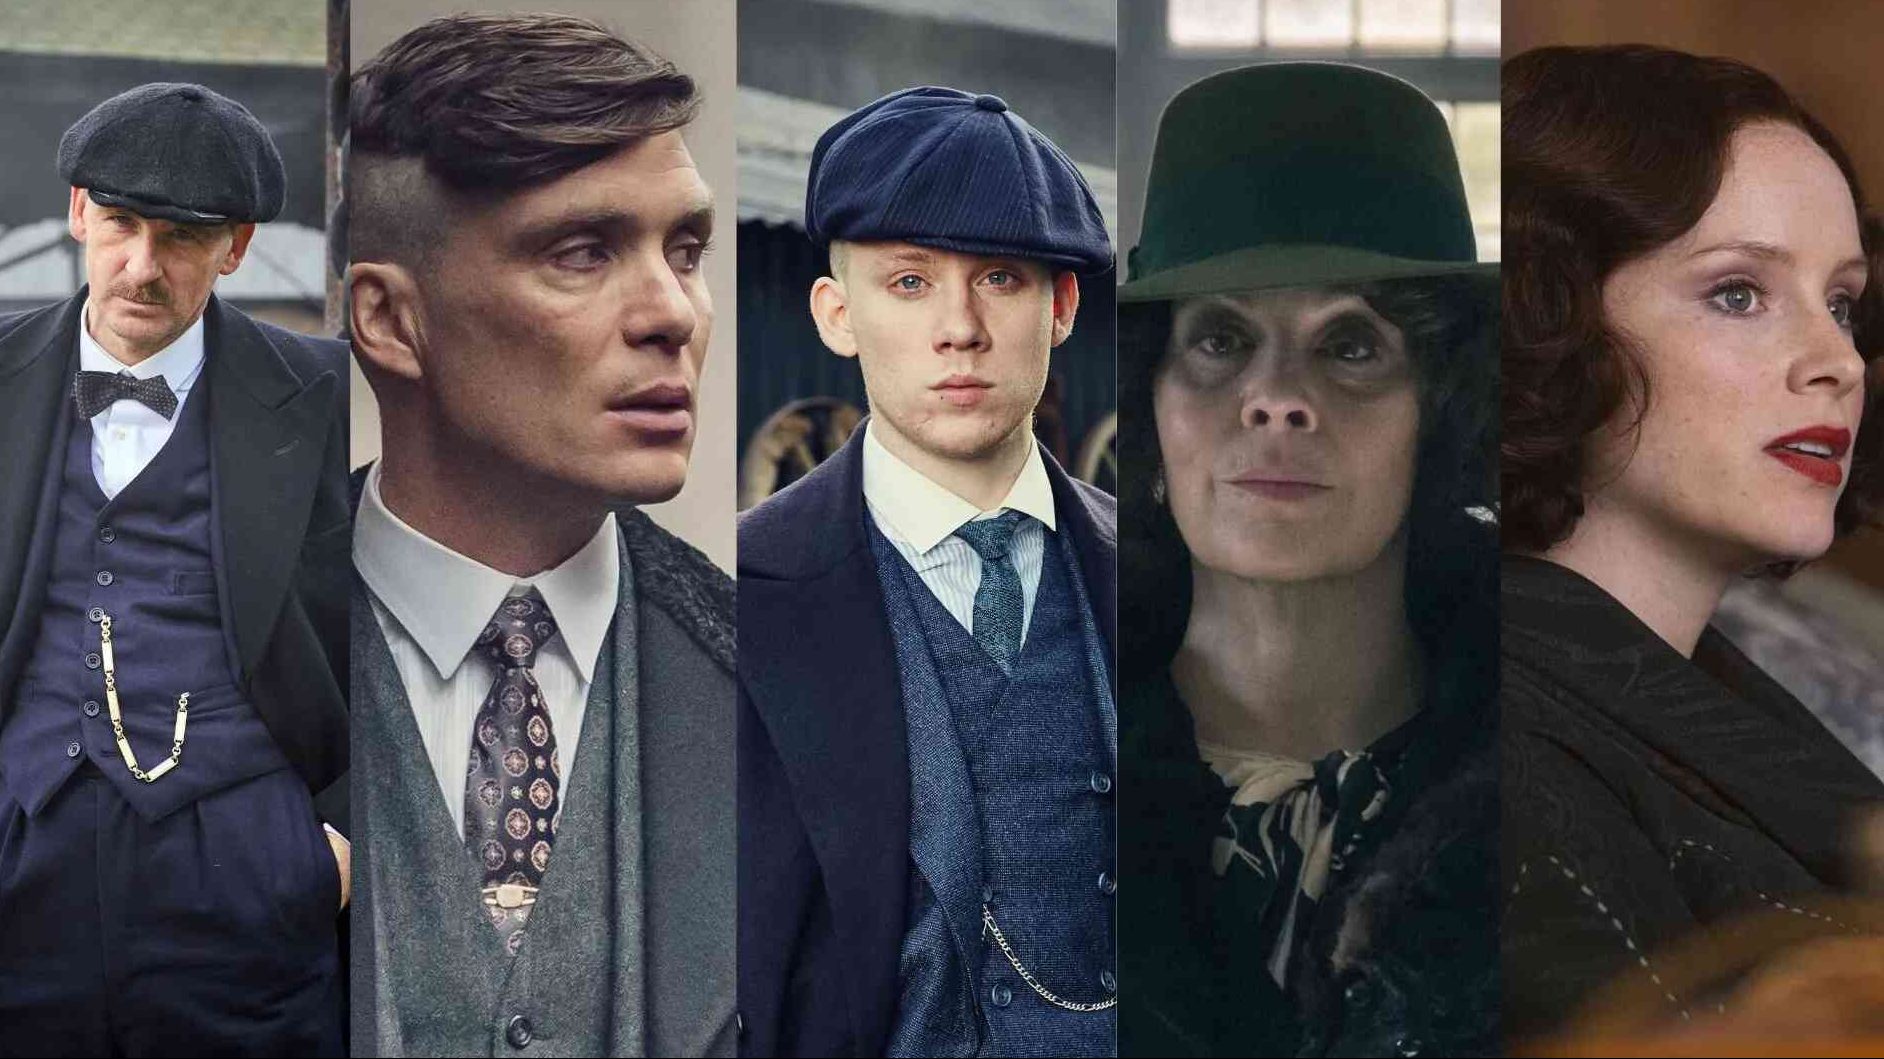 Peaky Blinders Characters: Who’s Who in the Shelby Family?